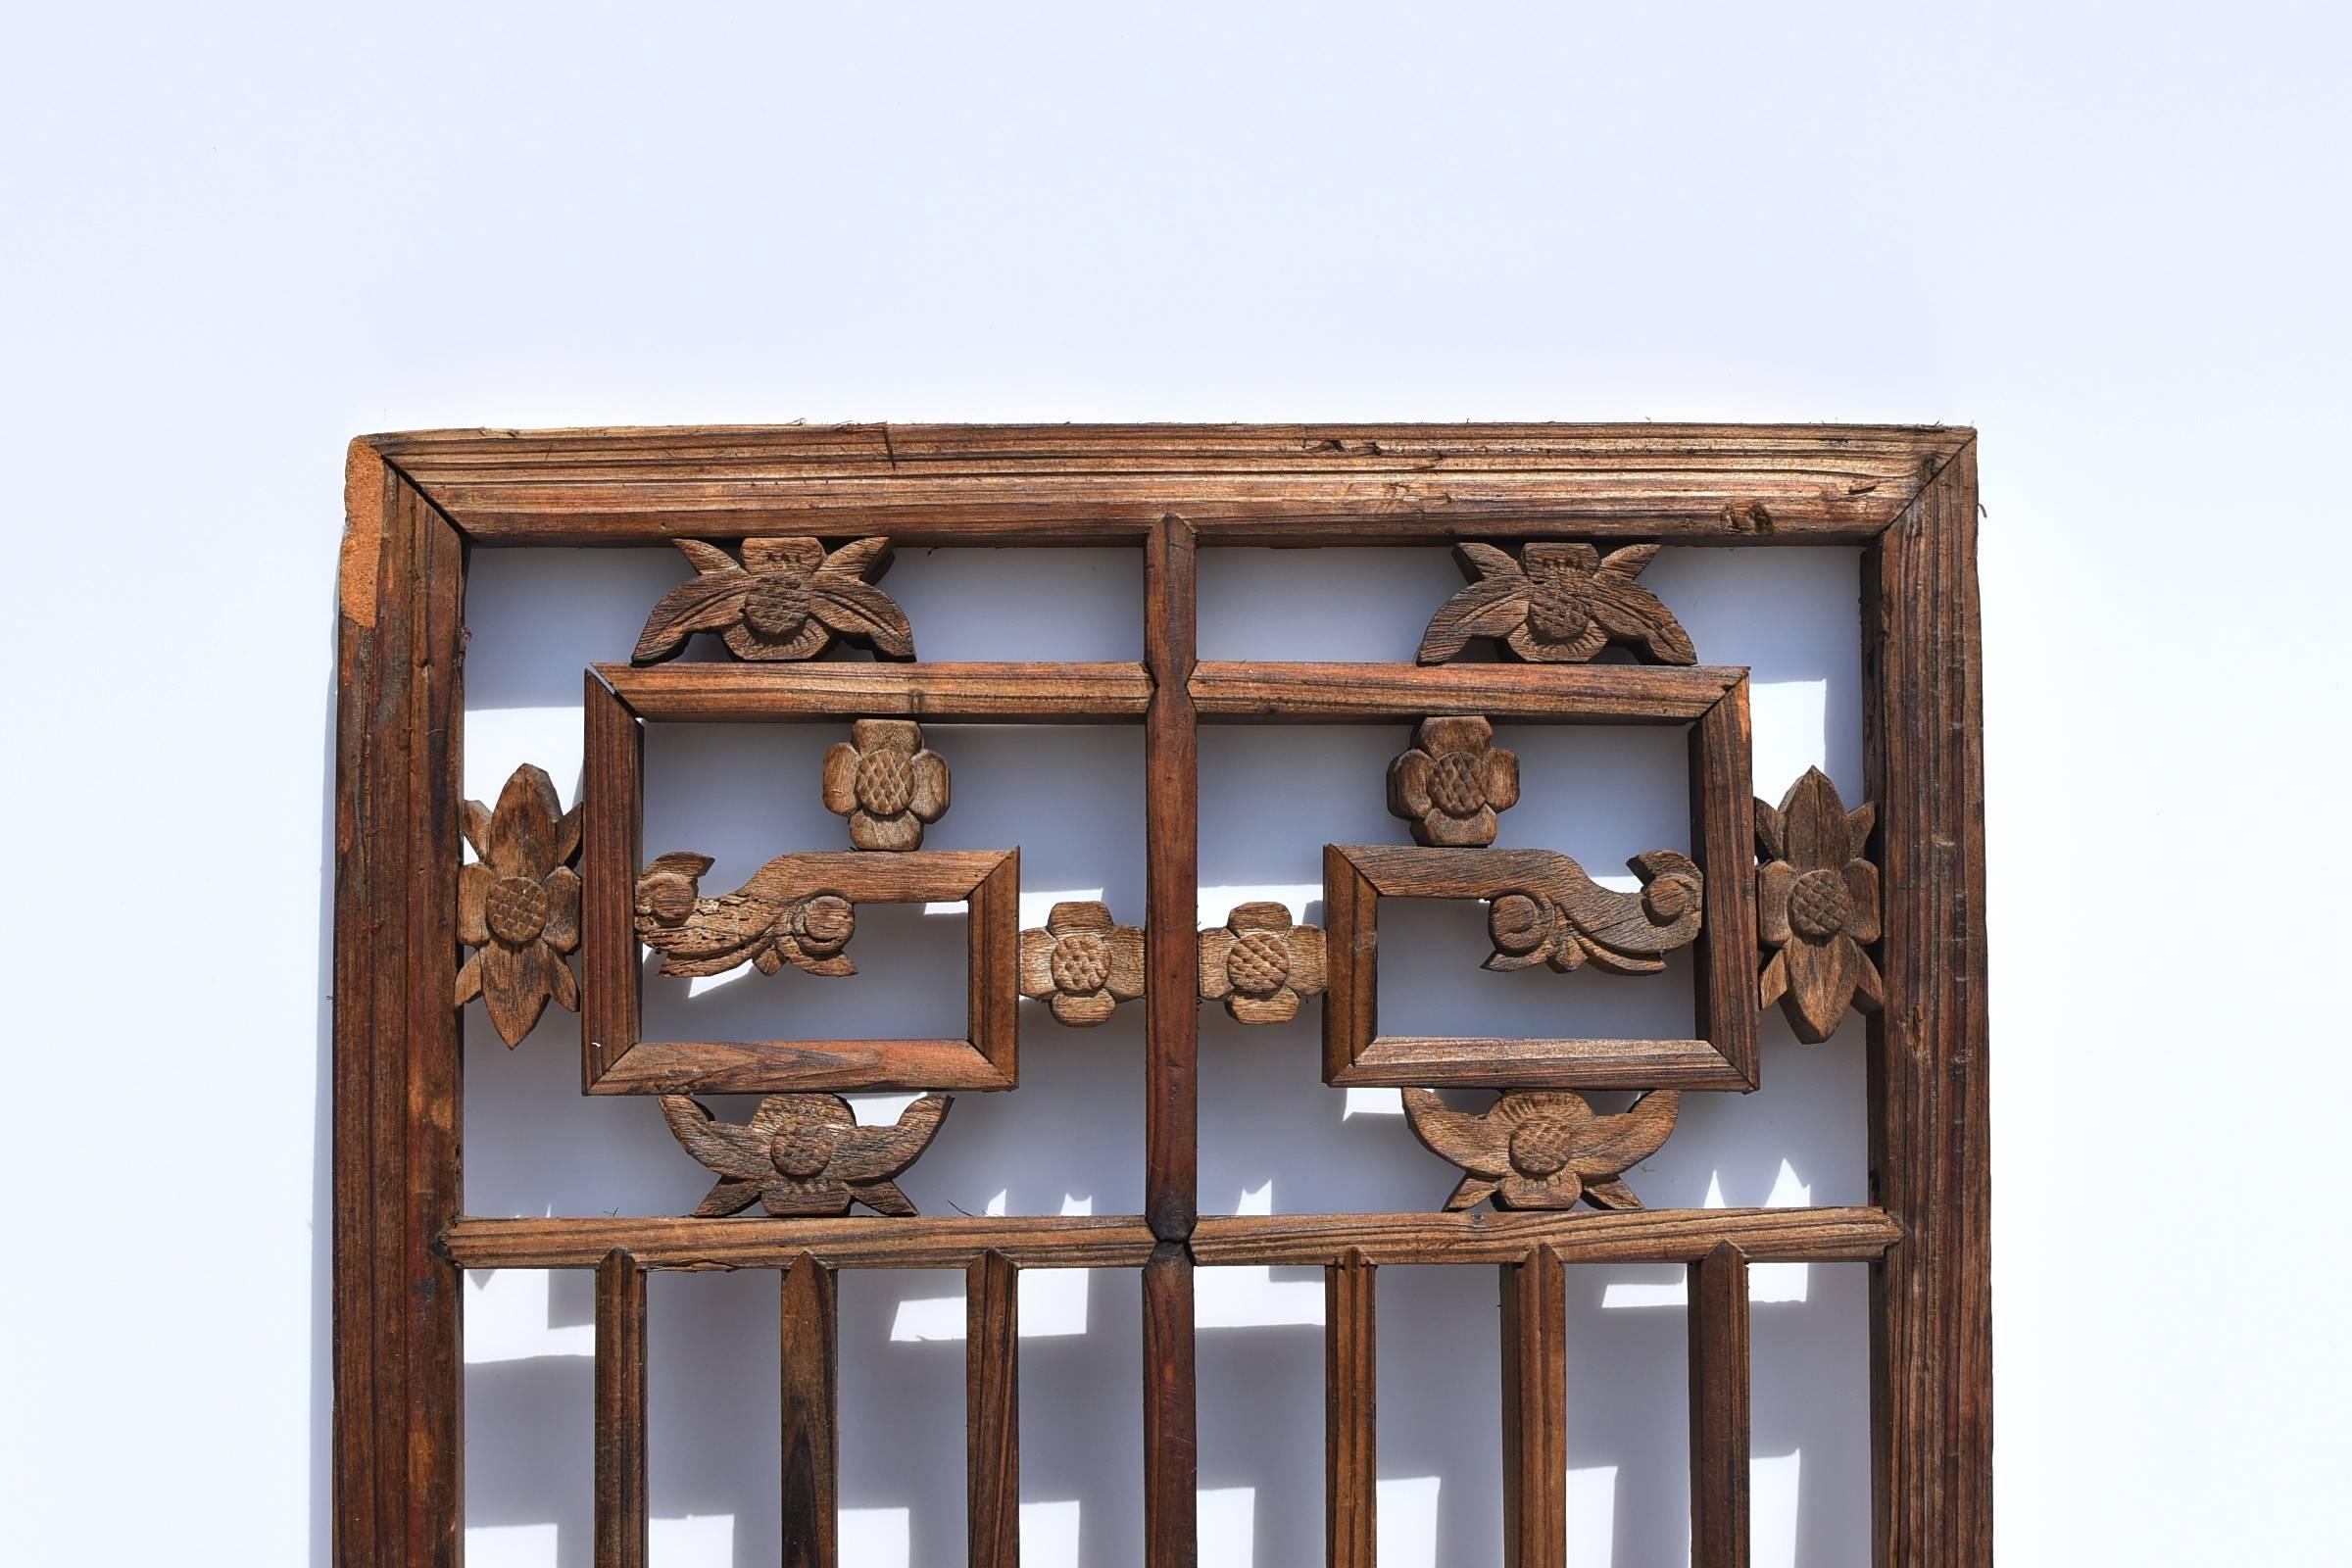 A nice natural finish window screen from the 19th century. 

The base design is a geometric one, with the top and mid-section in dragon scrolls inset by carved flowers. The flower is begonia, symbolizing happiness and prosperity. 

The